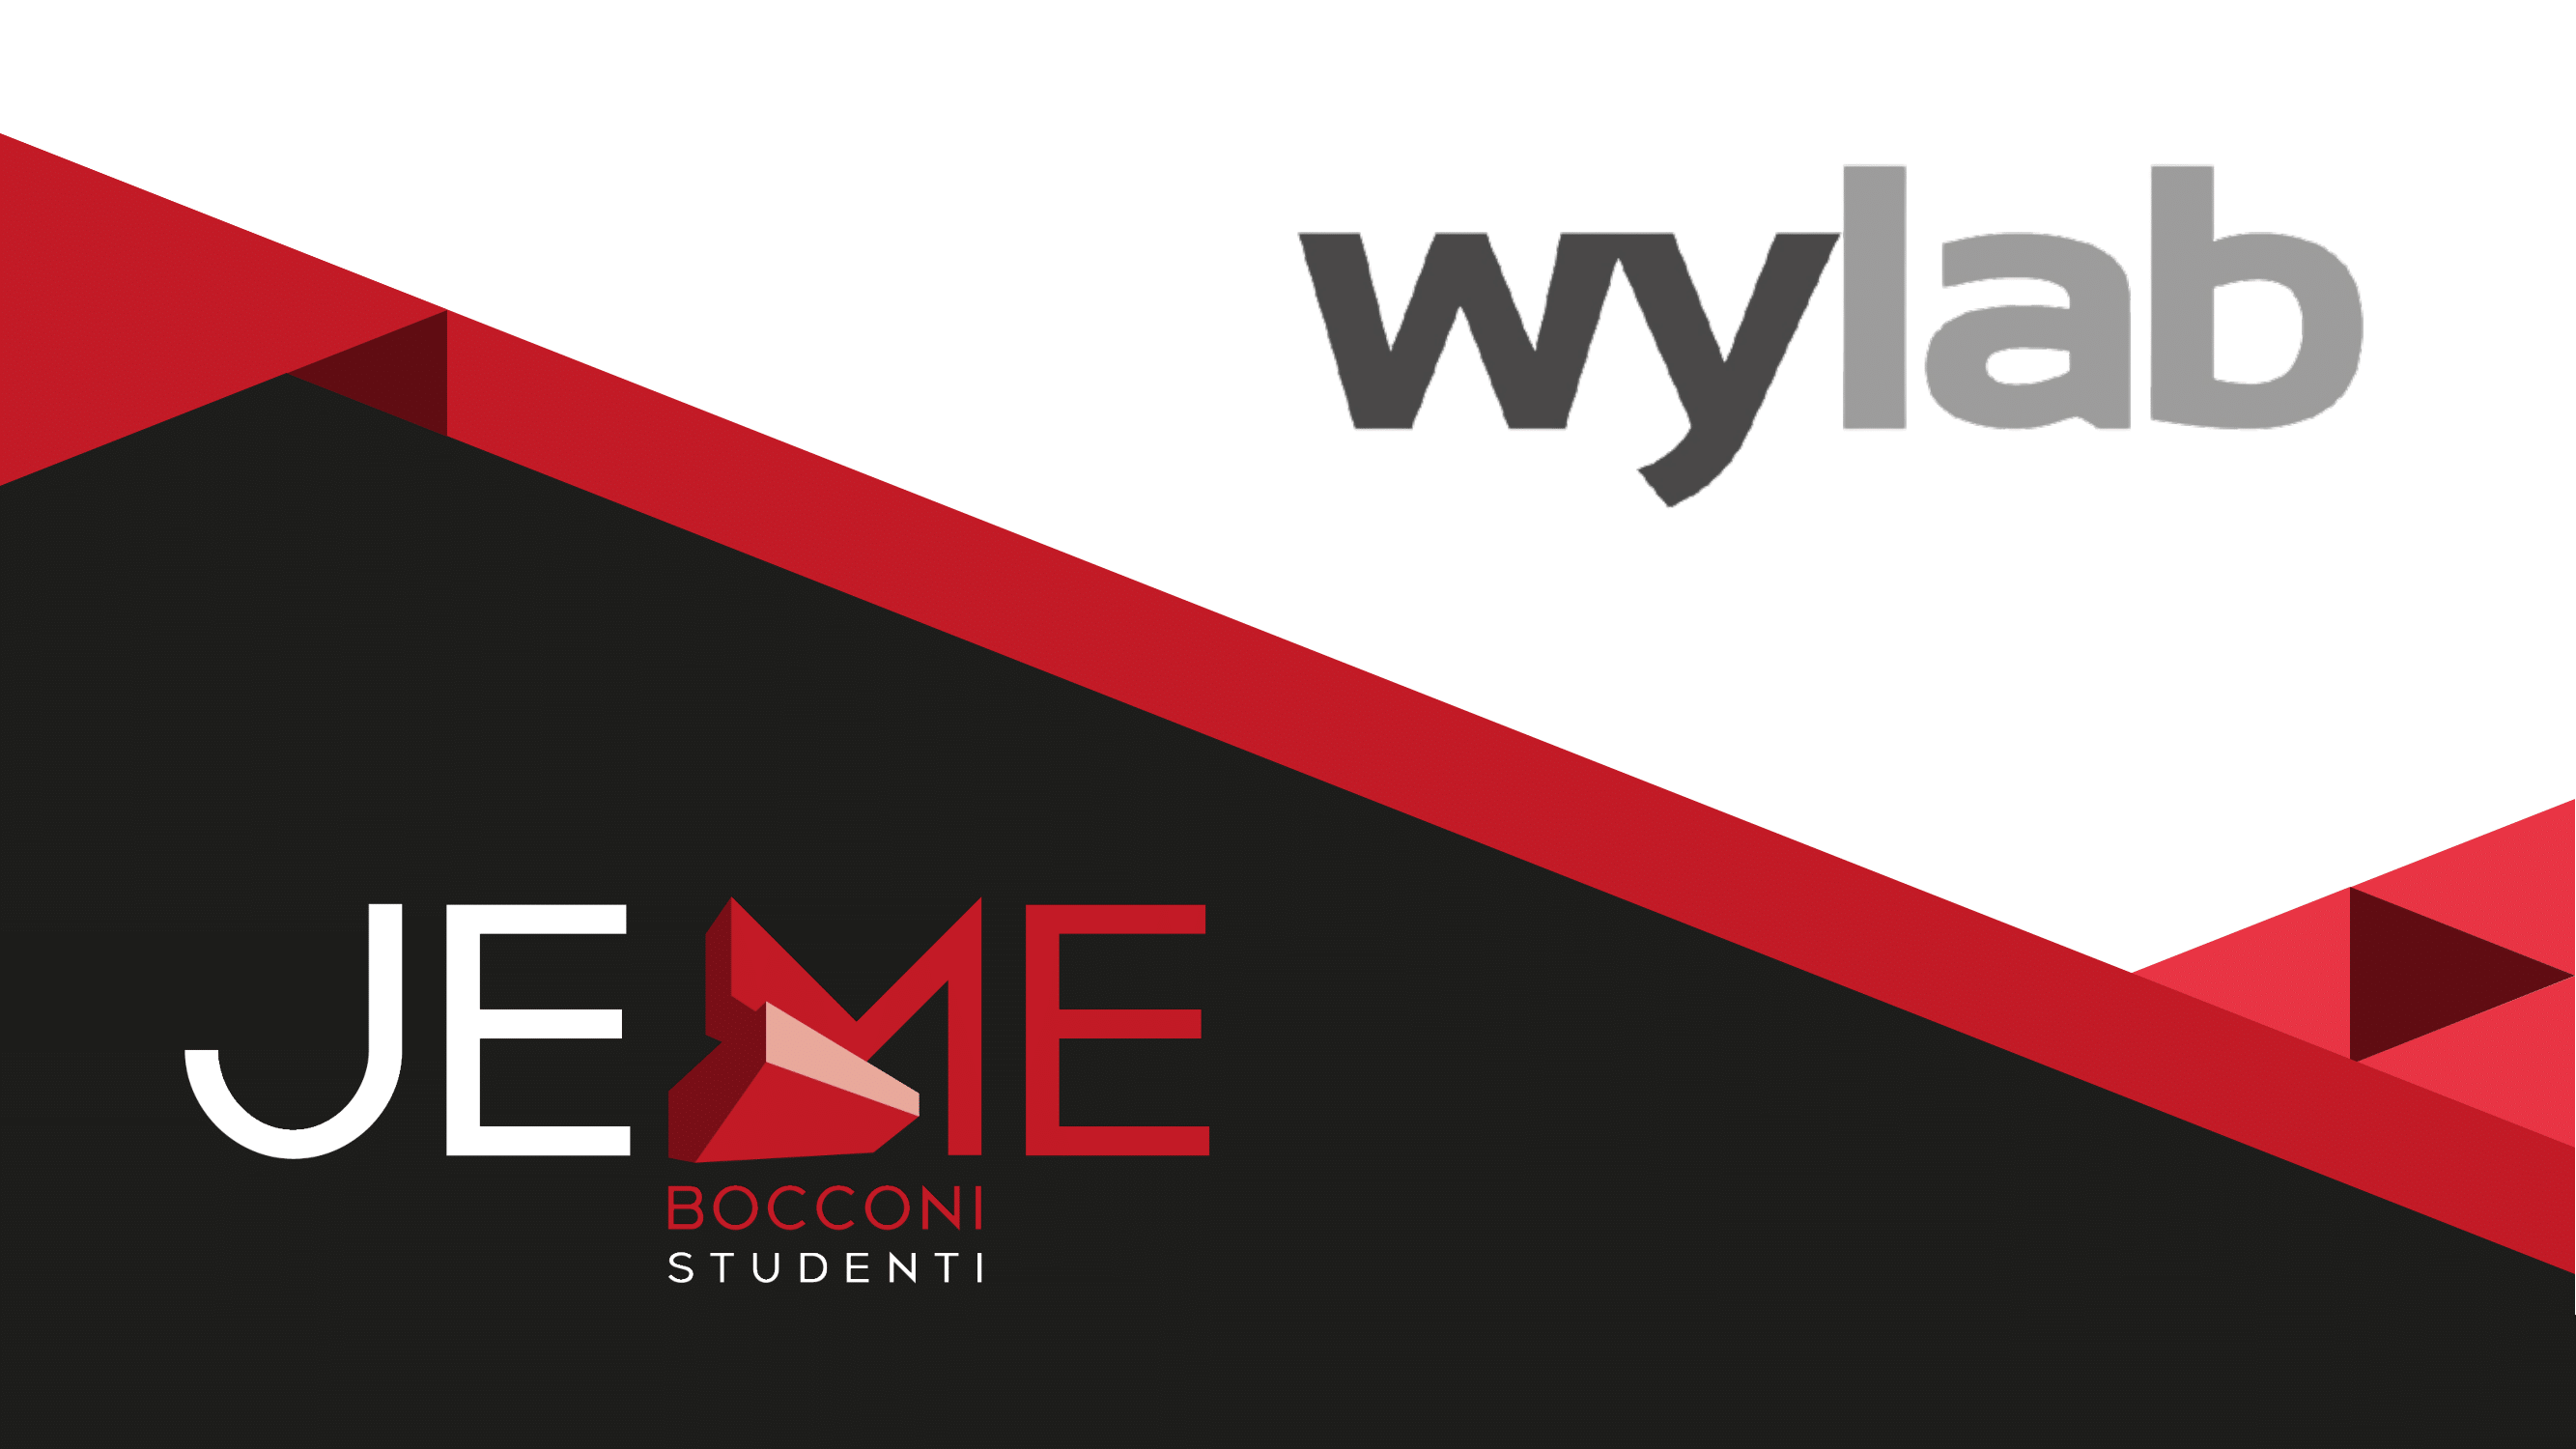 You are currently viewing JEME Bocconi Studenti enters into a partnership with Wylab